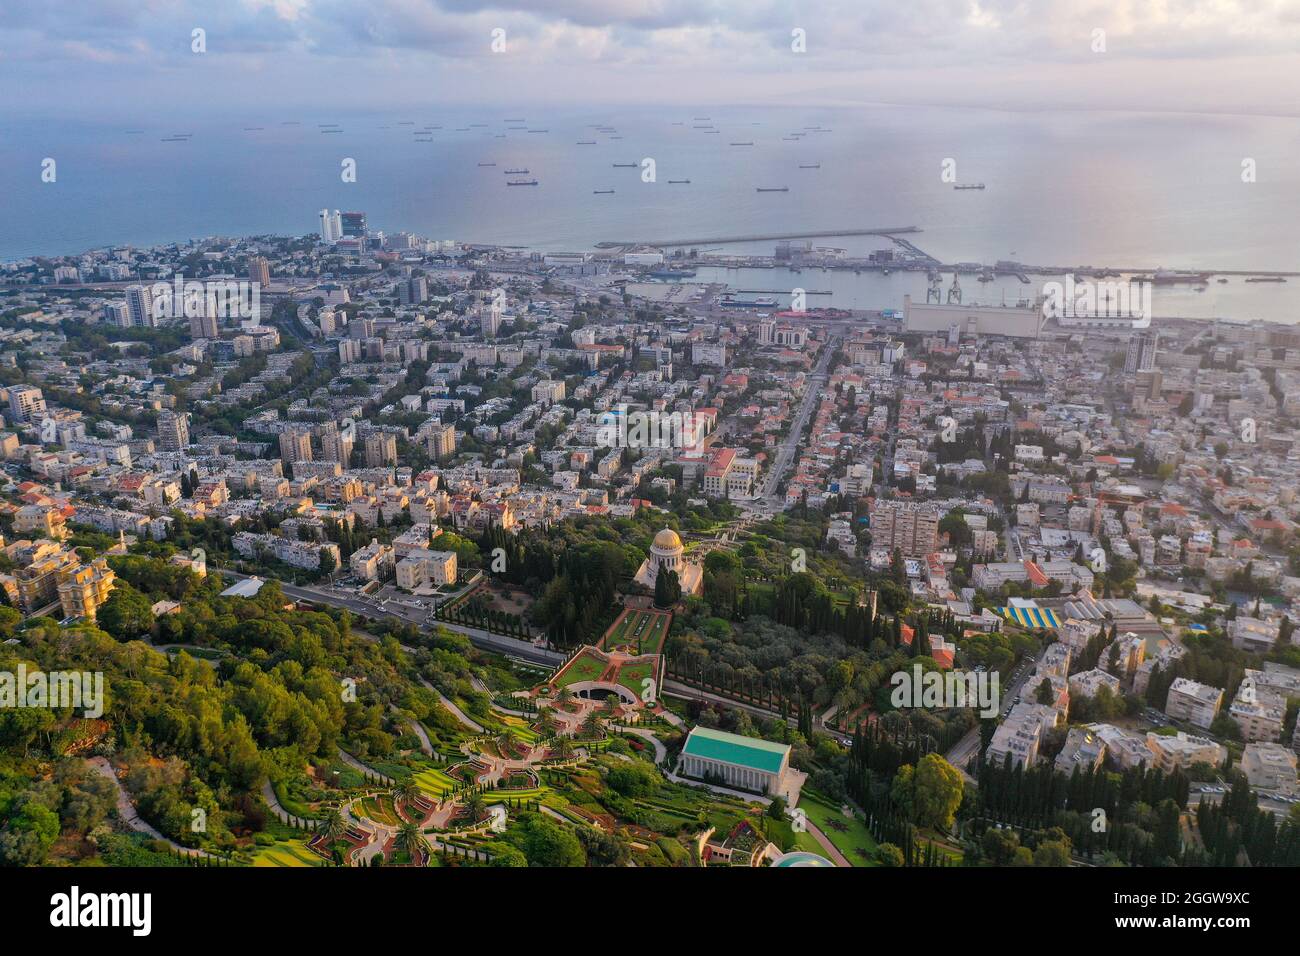 Bahai temple and gardens and Downtown Haifa at sunrise, Aerial image. Stock Photo